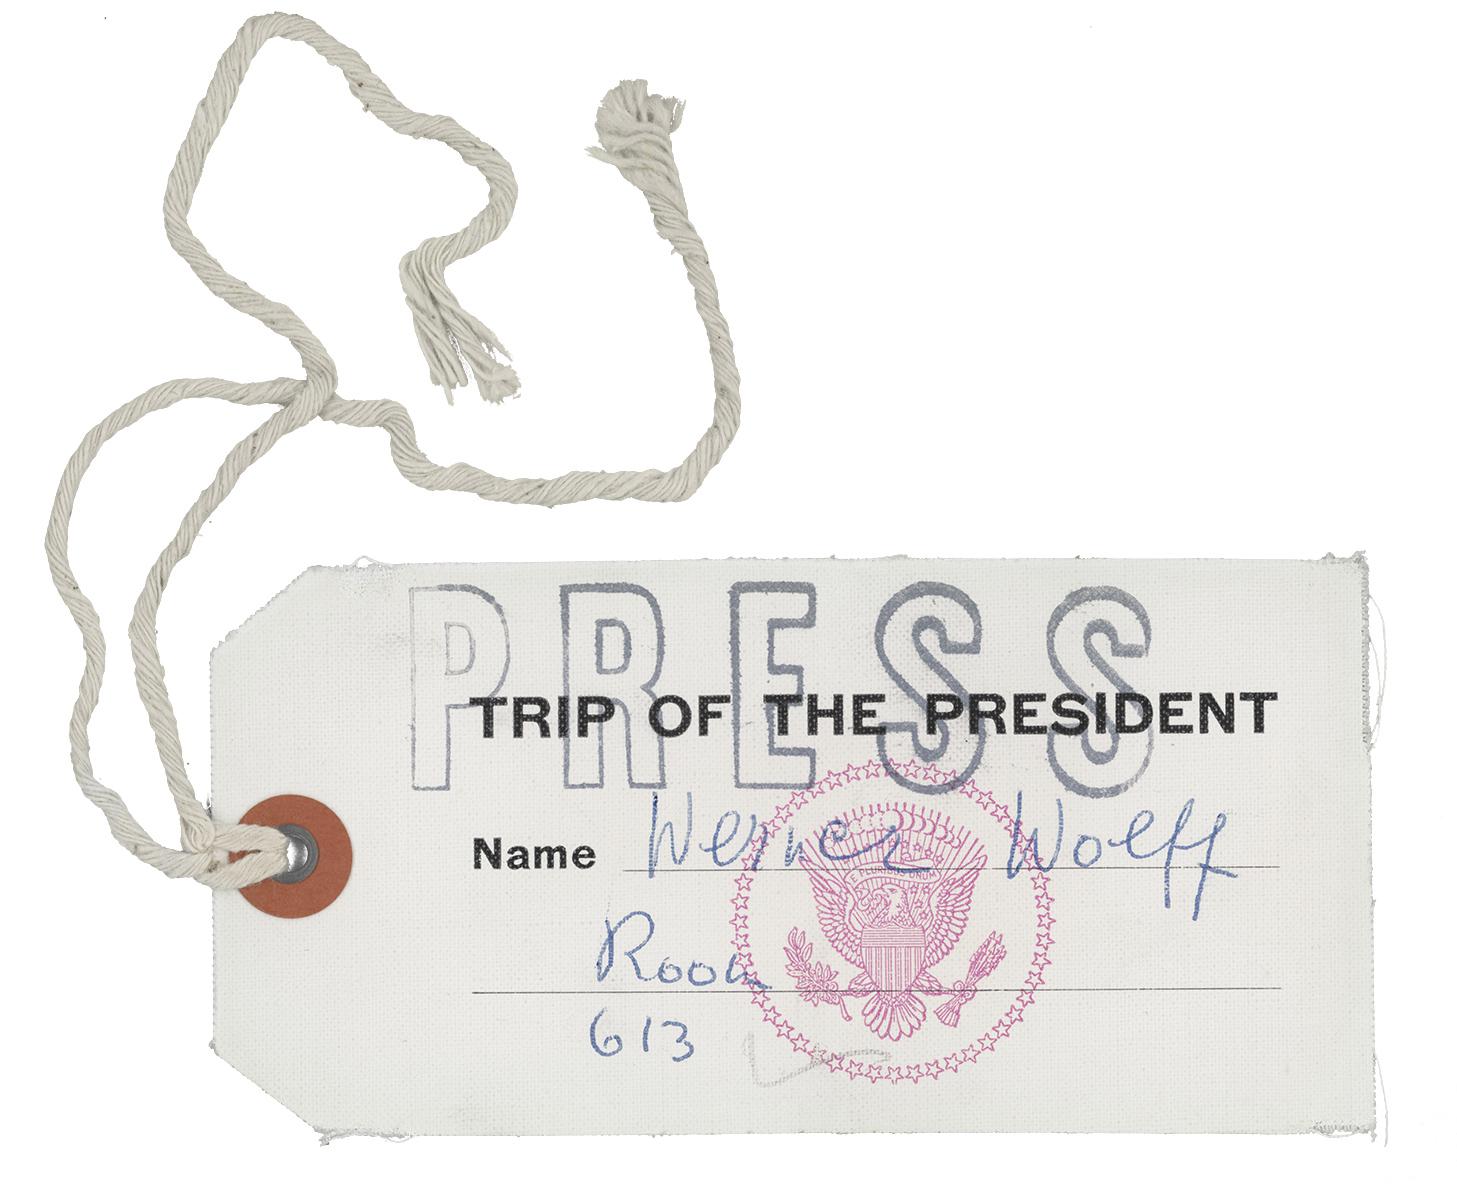 A press pass card for Werner Wolff.